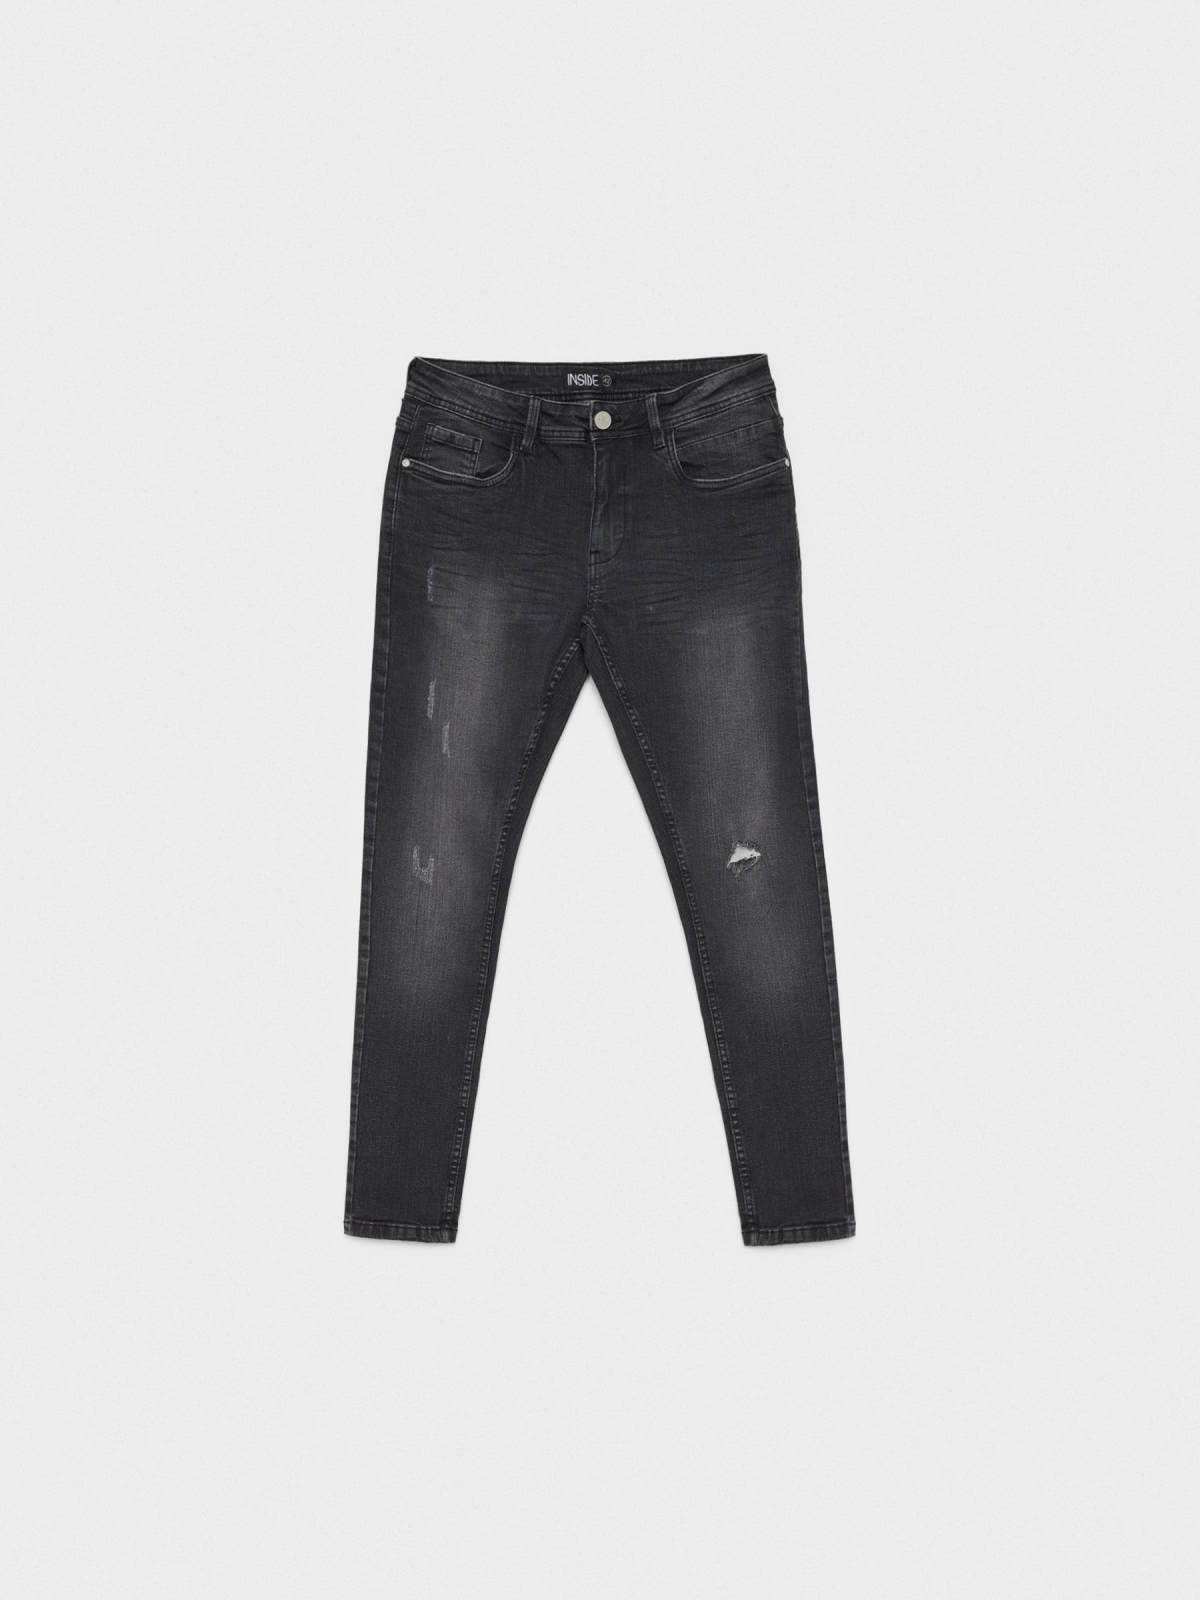 Jeans super skinny negros con roto | Jeans Hombre | INSIDE